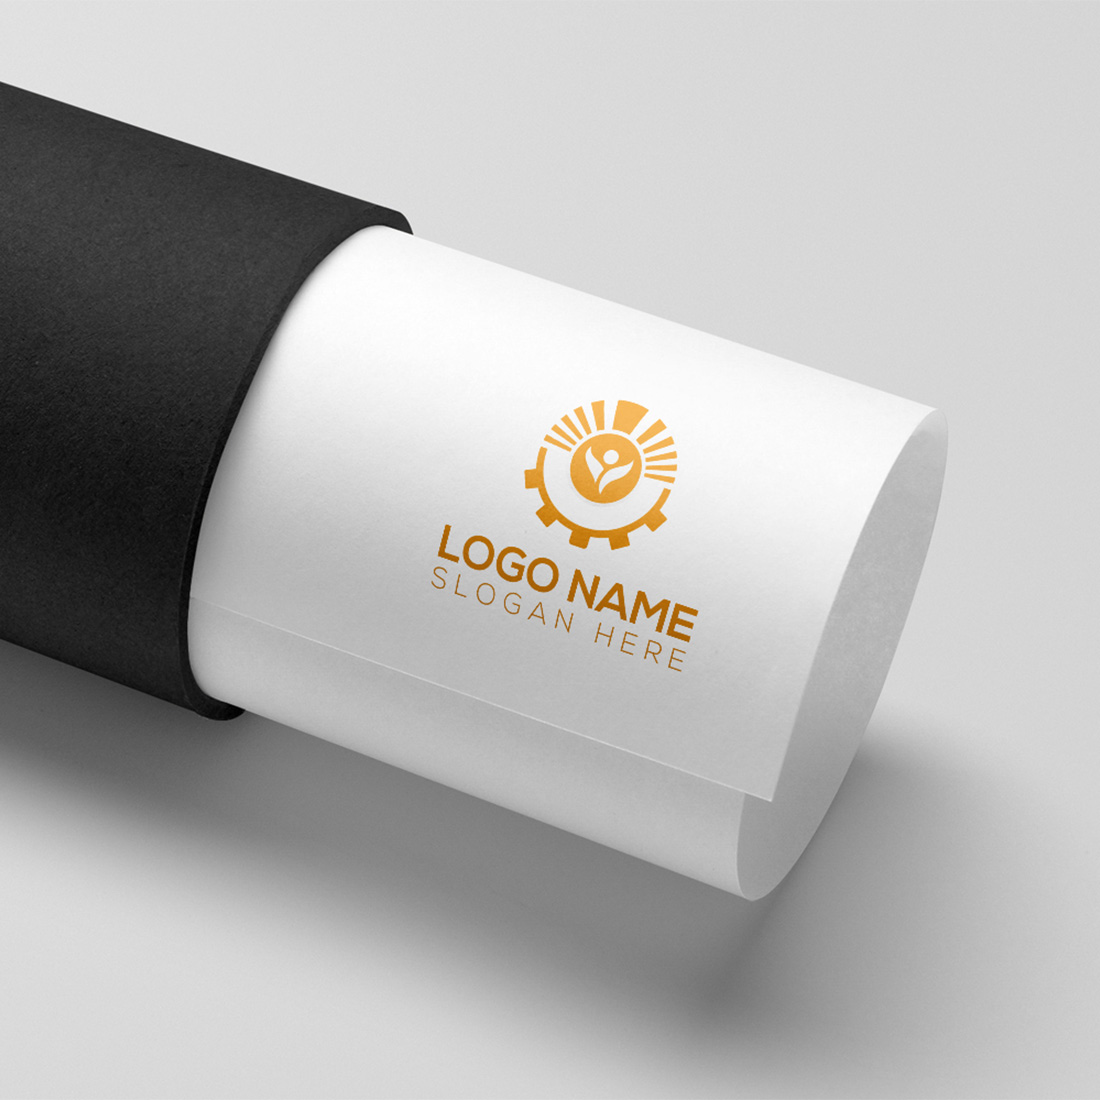 Mockup example preview with Technology Logo Template.